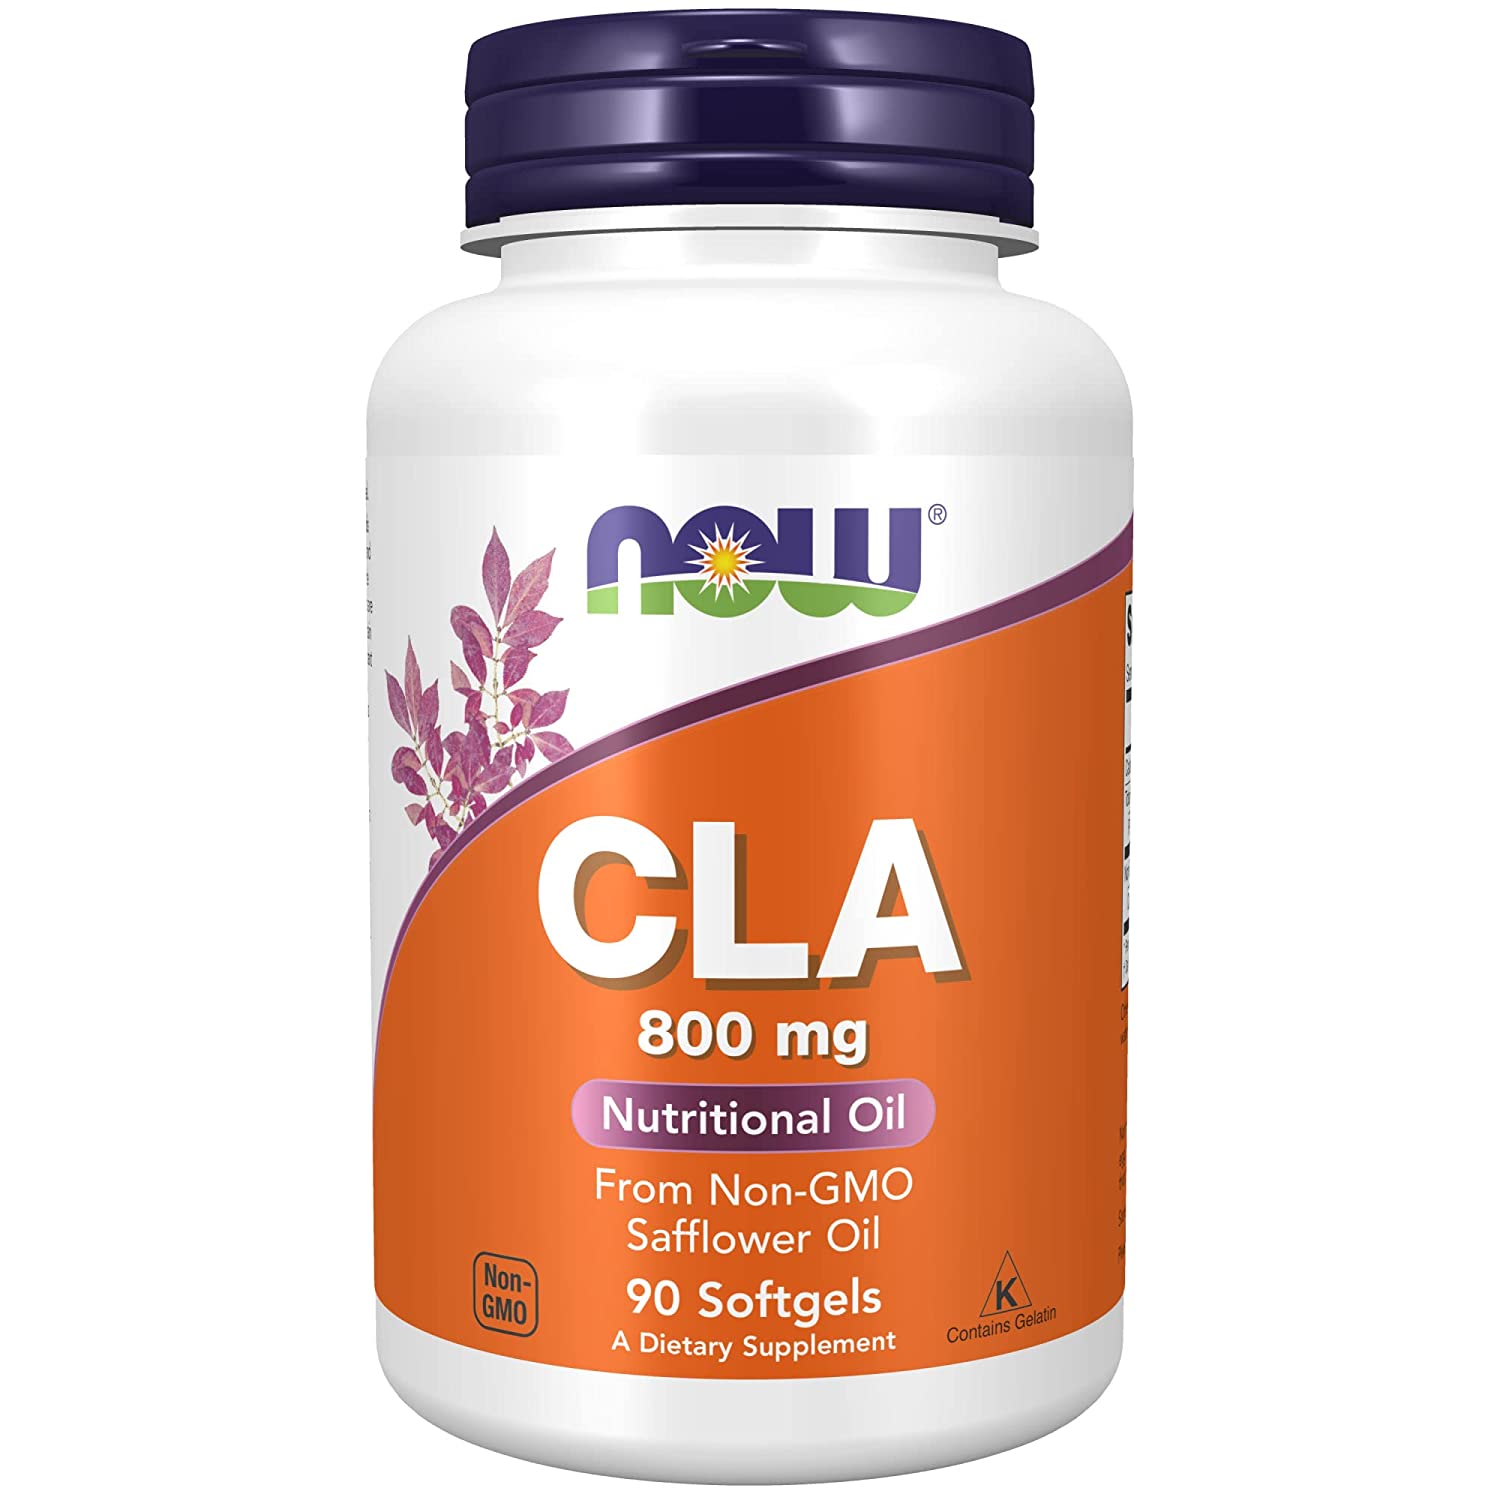 NOW Supplements, CLA (Conjugated Linoleic Acid) 800 mg, Nutritional Oil, 90 Softgels